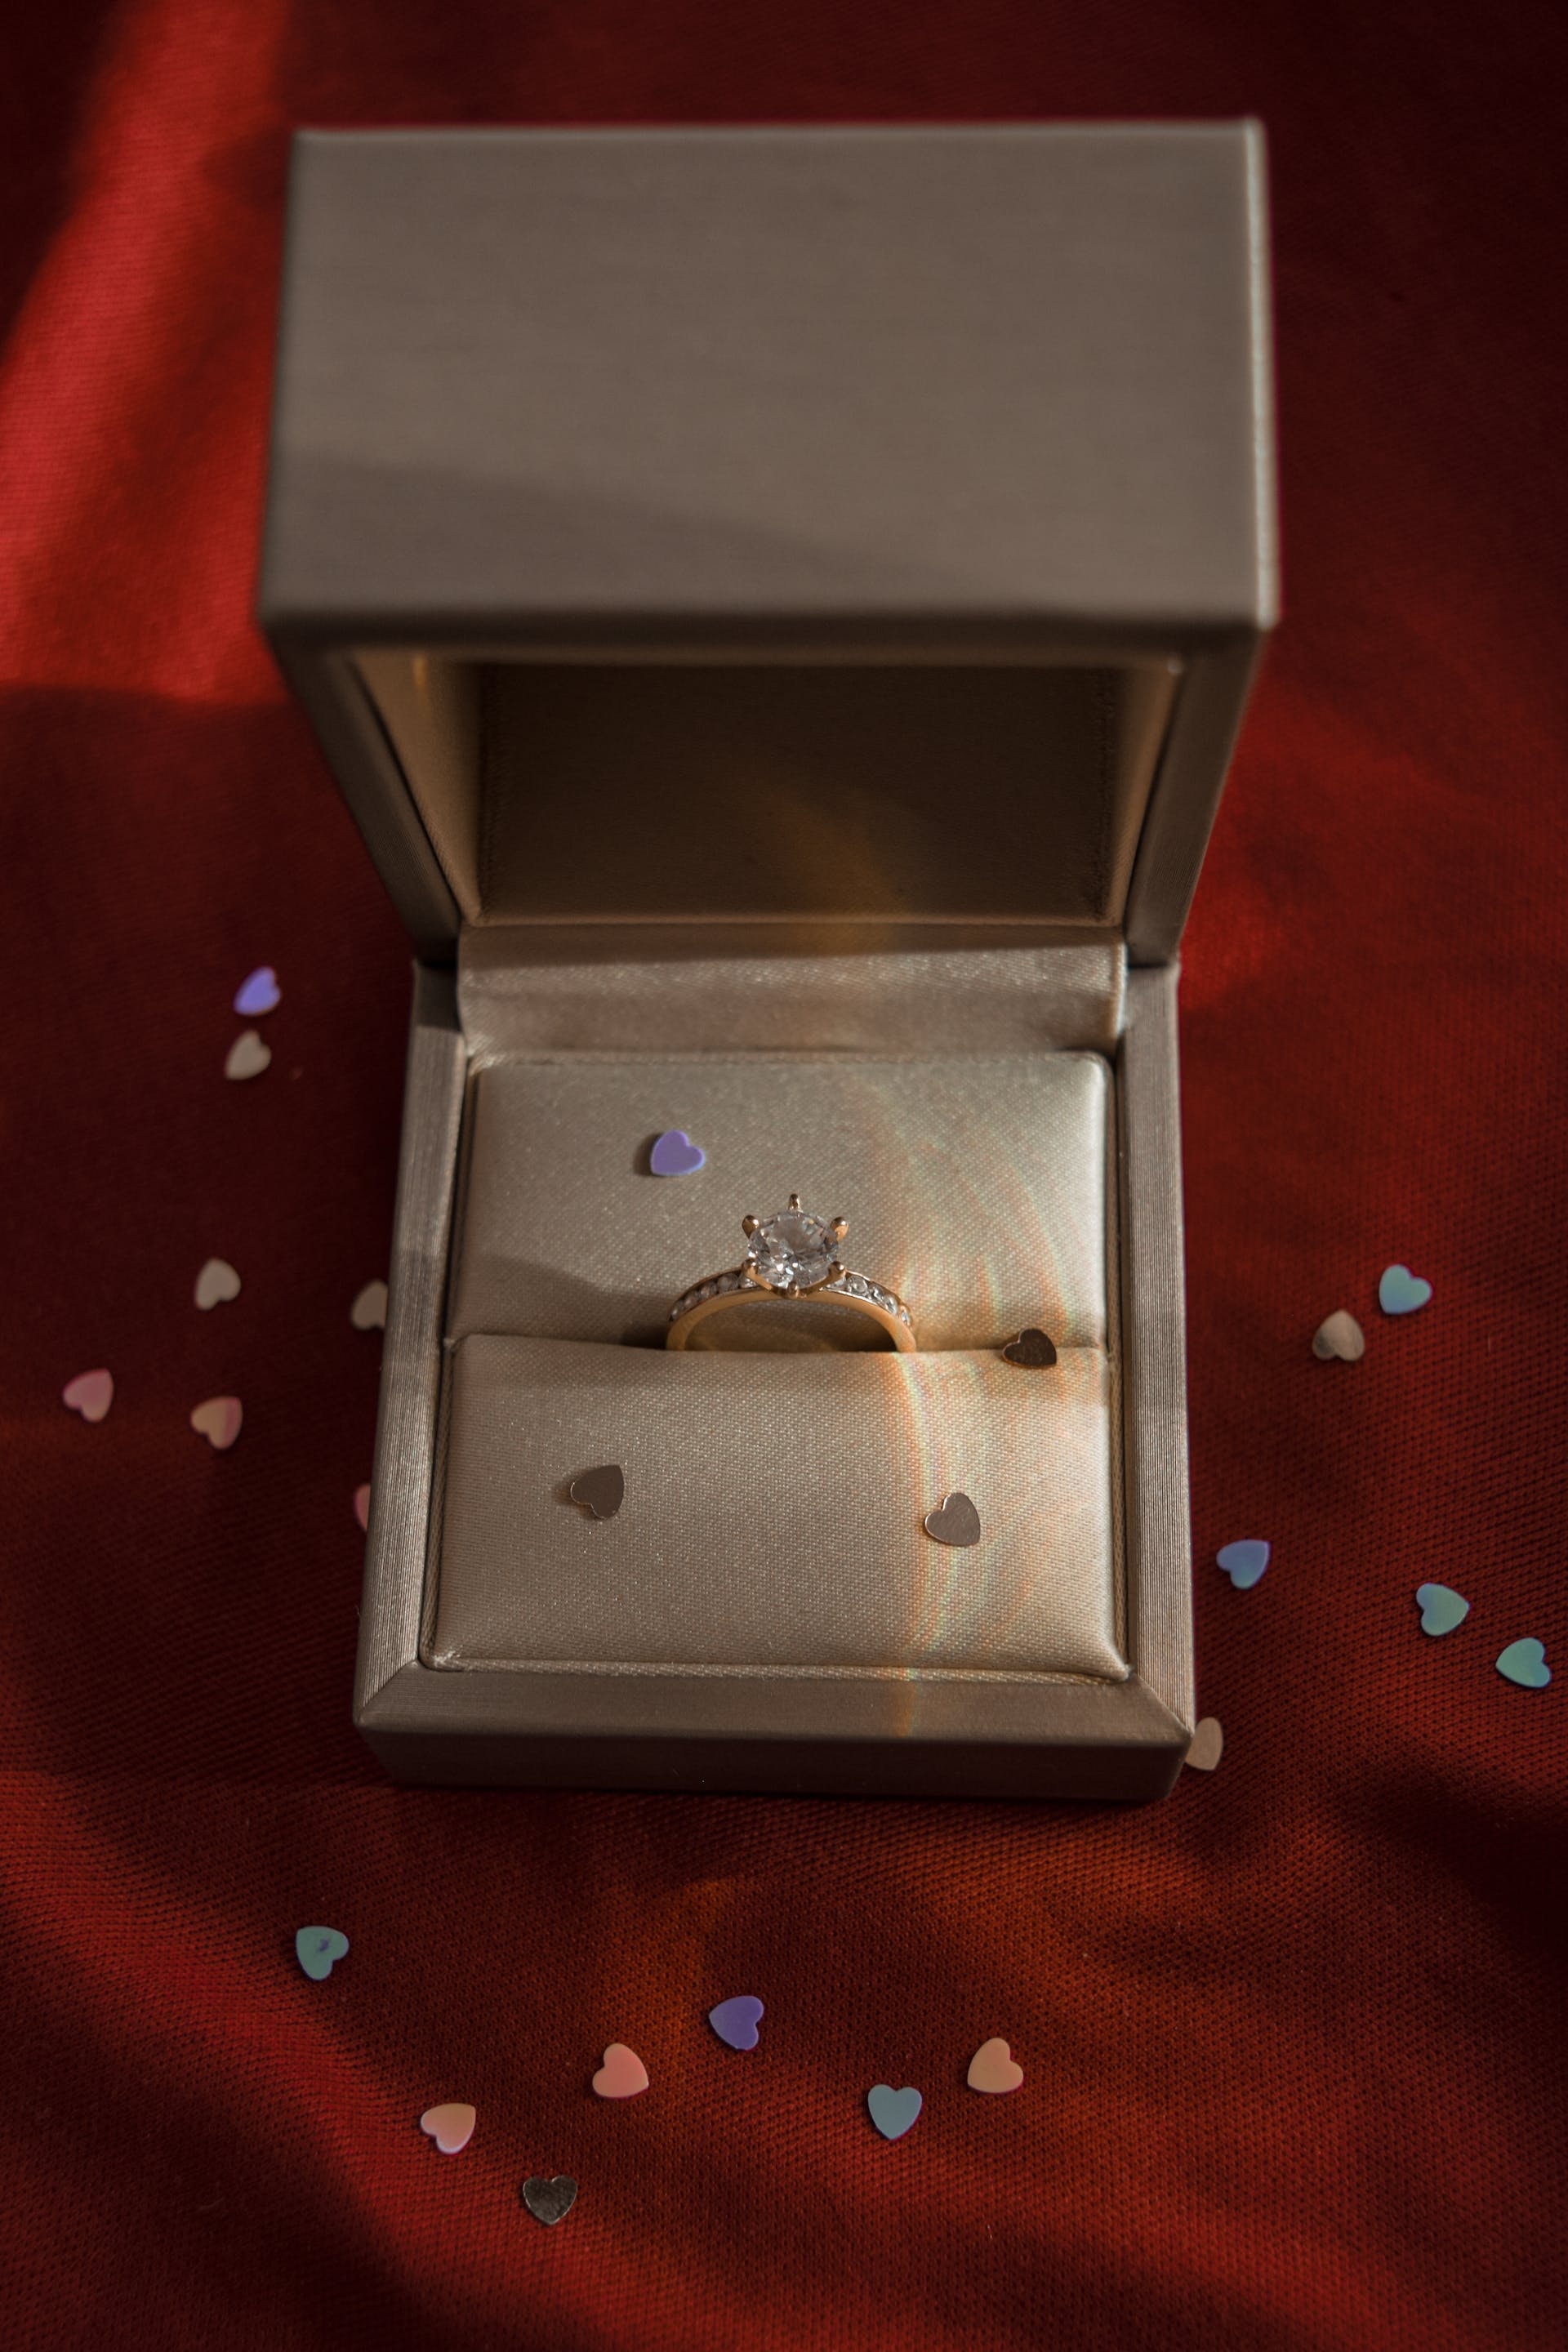 A ring in a box | Source: Pexels